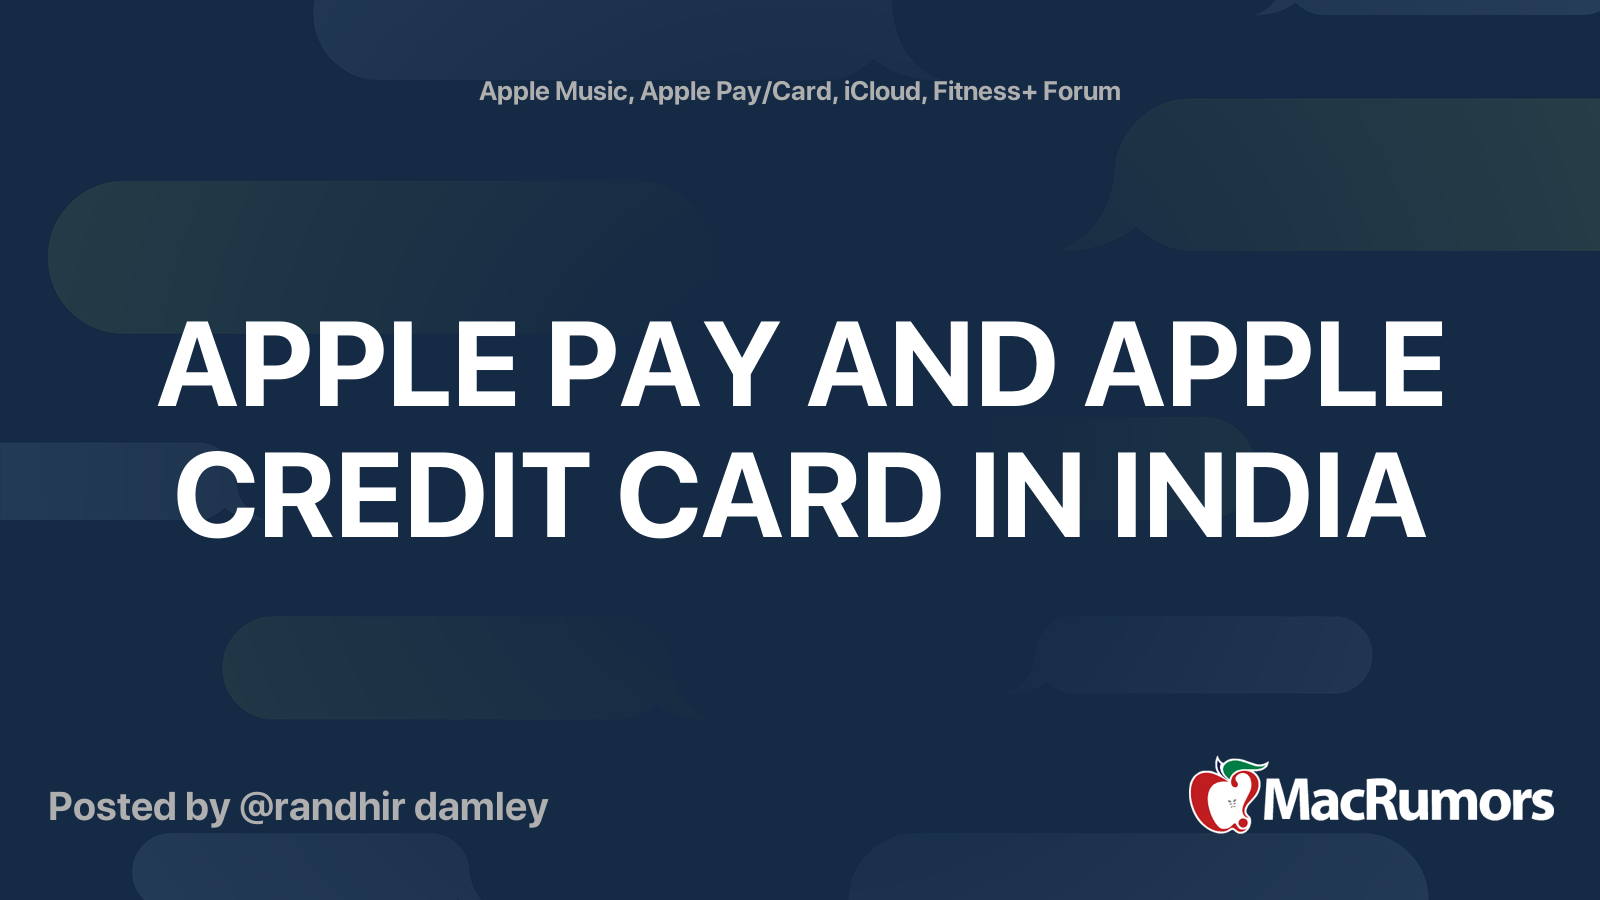 APPLE PAY AND APPLE CREDIT CARD IN INDIA